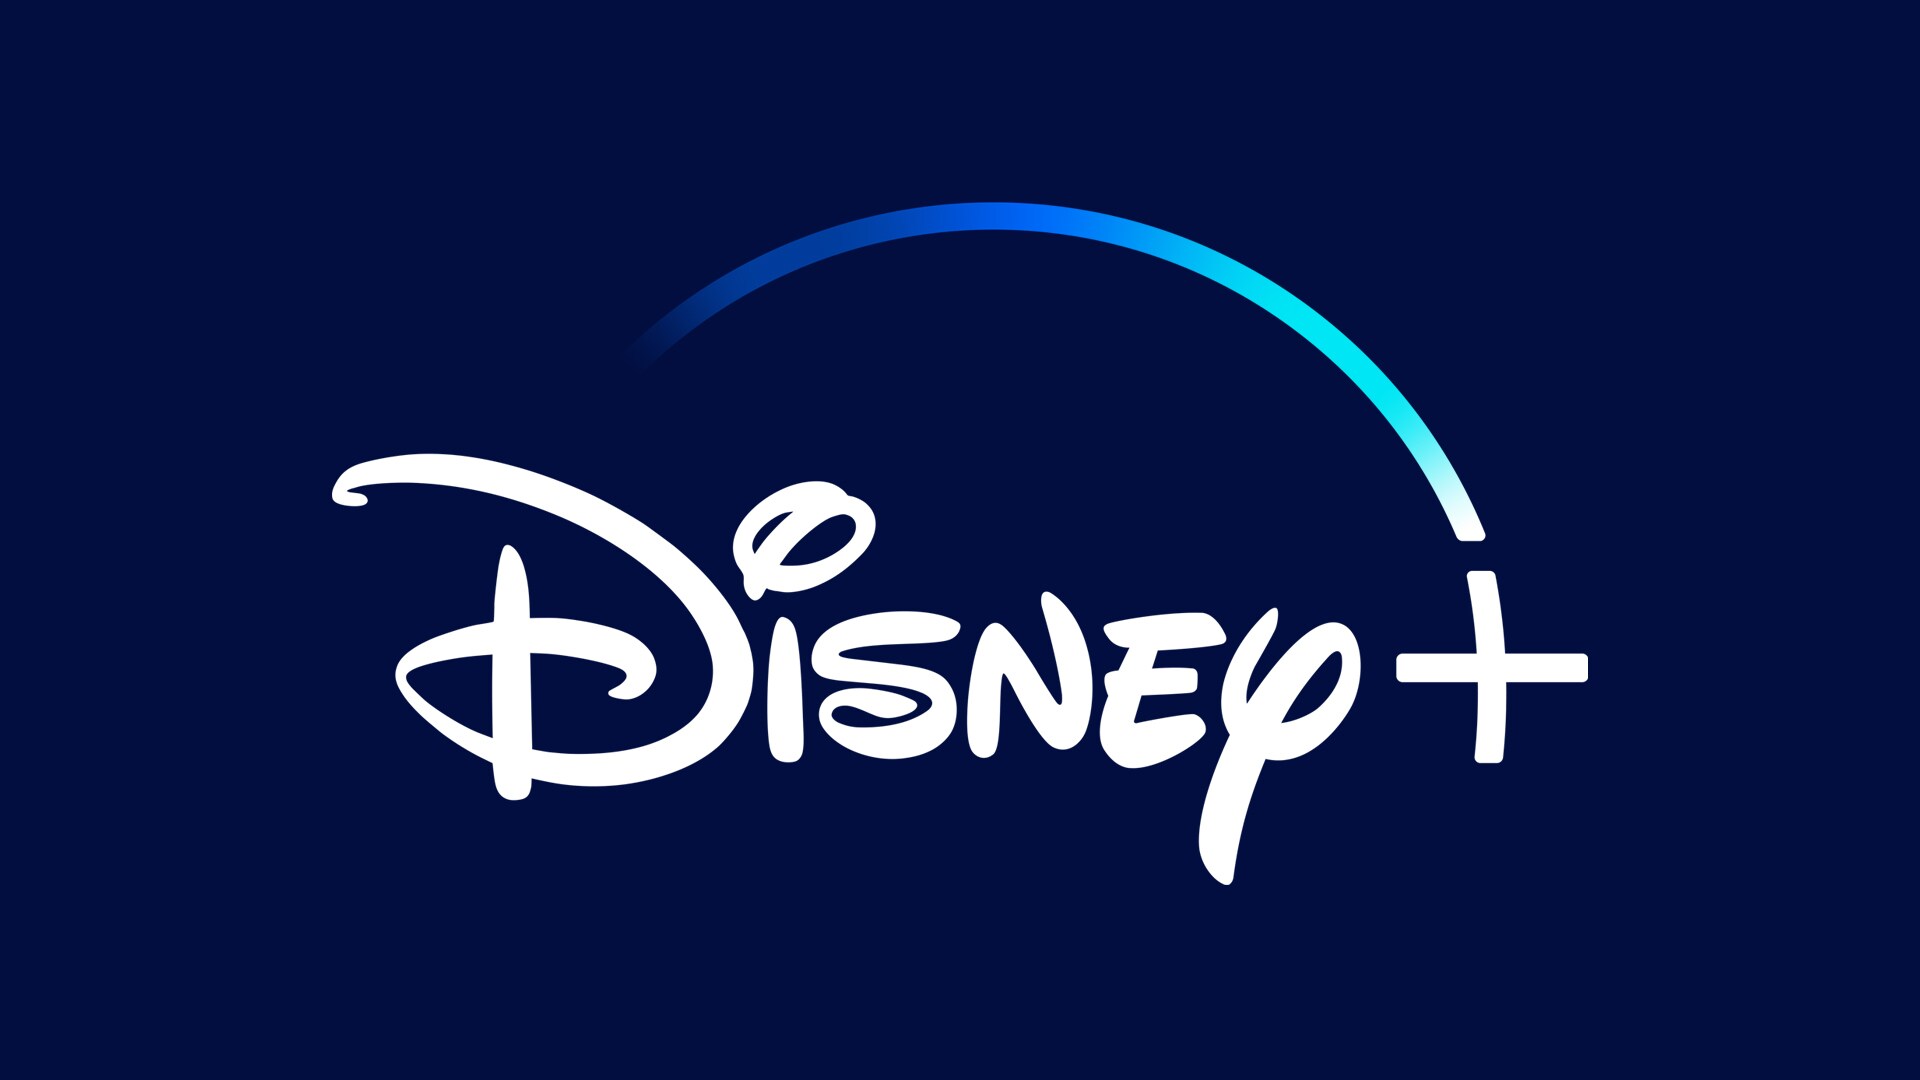 Disney+ Reveals Anticipated Premiere Dates And Trailers At Television Critics Association Summer 2022 Press Tour